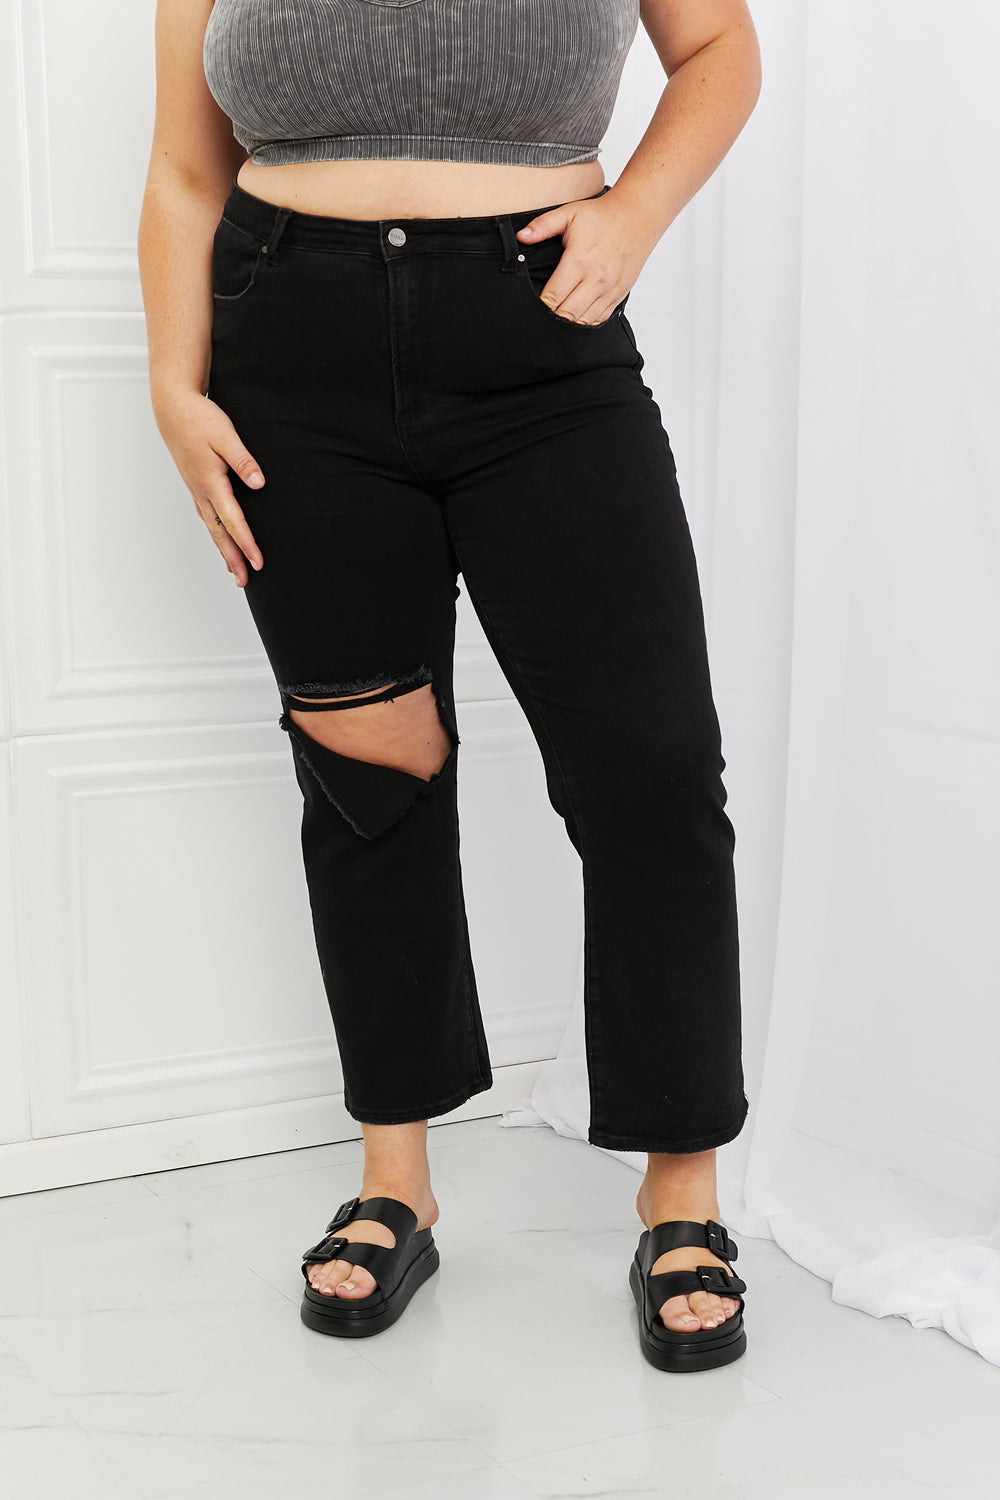 RISEN Full Size Yasmin Relaxed Distressed Jeans - The Fashion Unicorn